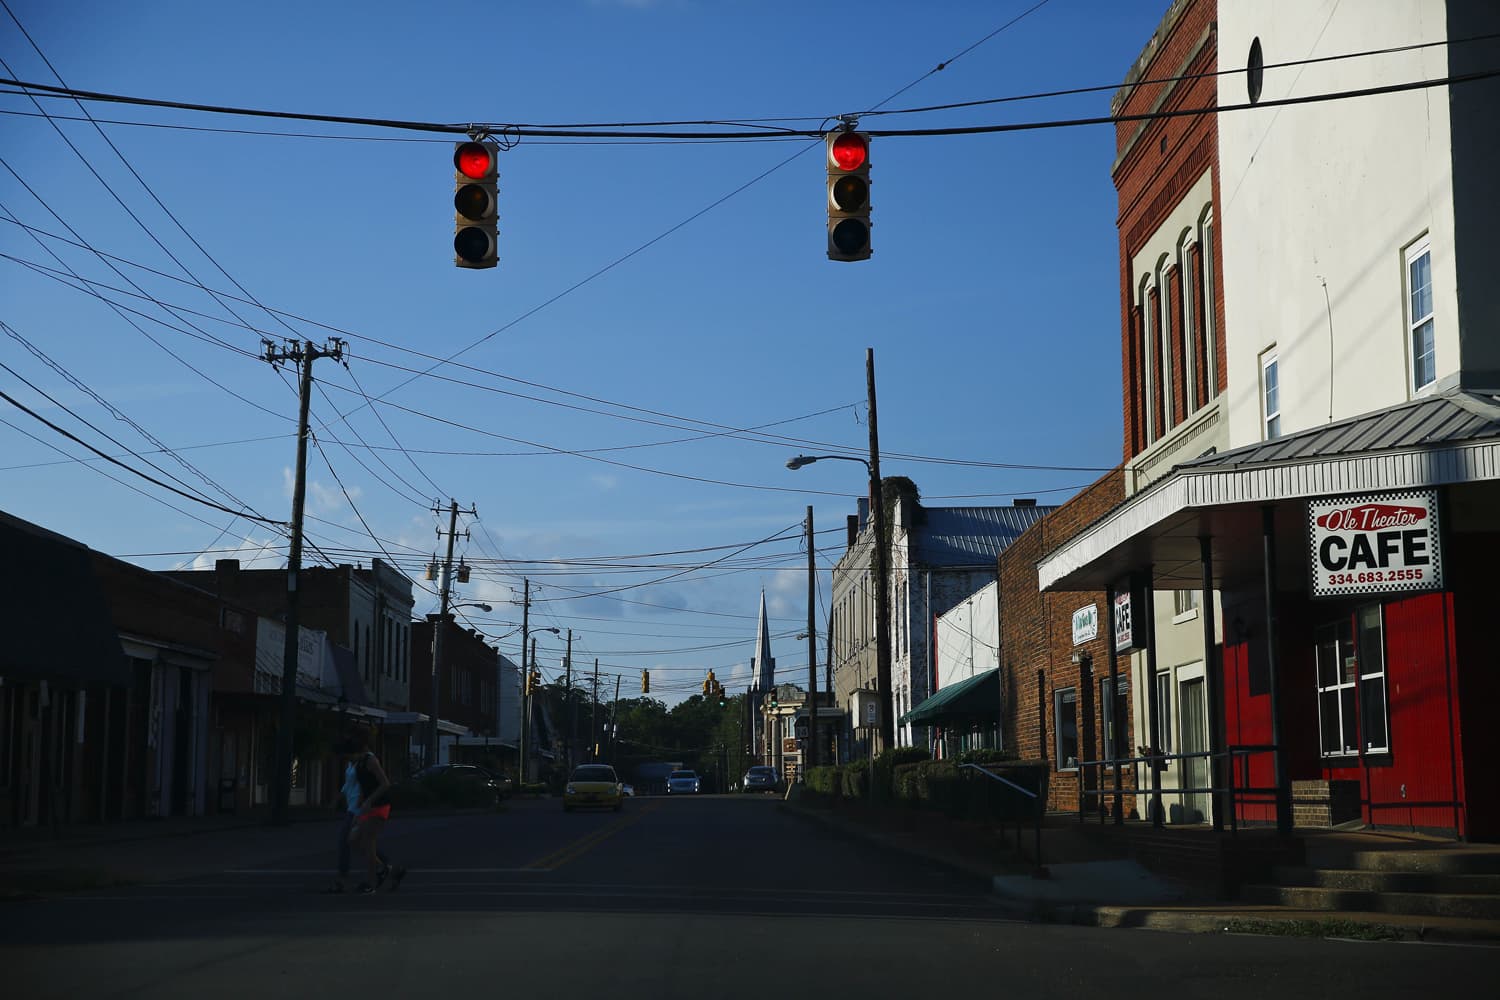 Two residents cross one of the main streets in downtown Marion, Ala., Wednesday, Aug. 24, 2016. Stretching from east Texas to southern Virginia, the impoverished area known as the Black Belt is heavily populated by blacks. (AP Photo/Brynn Anderson)